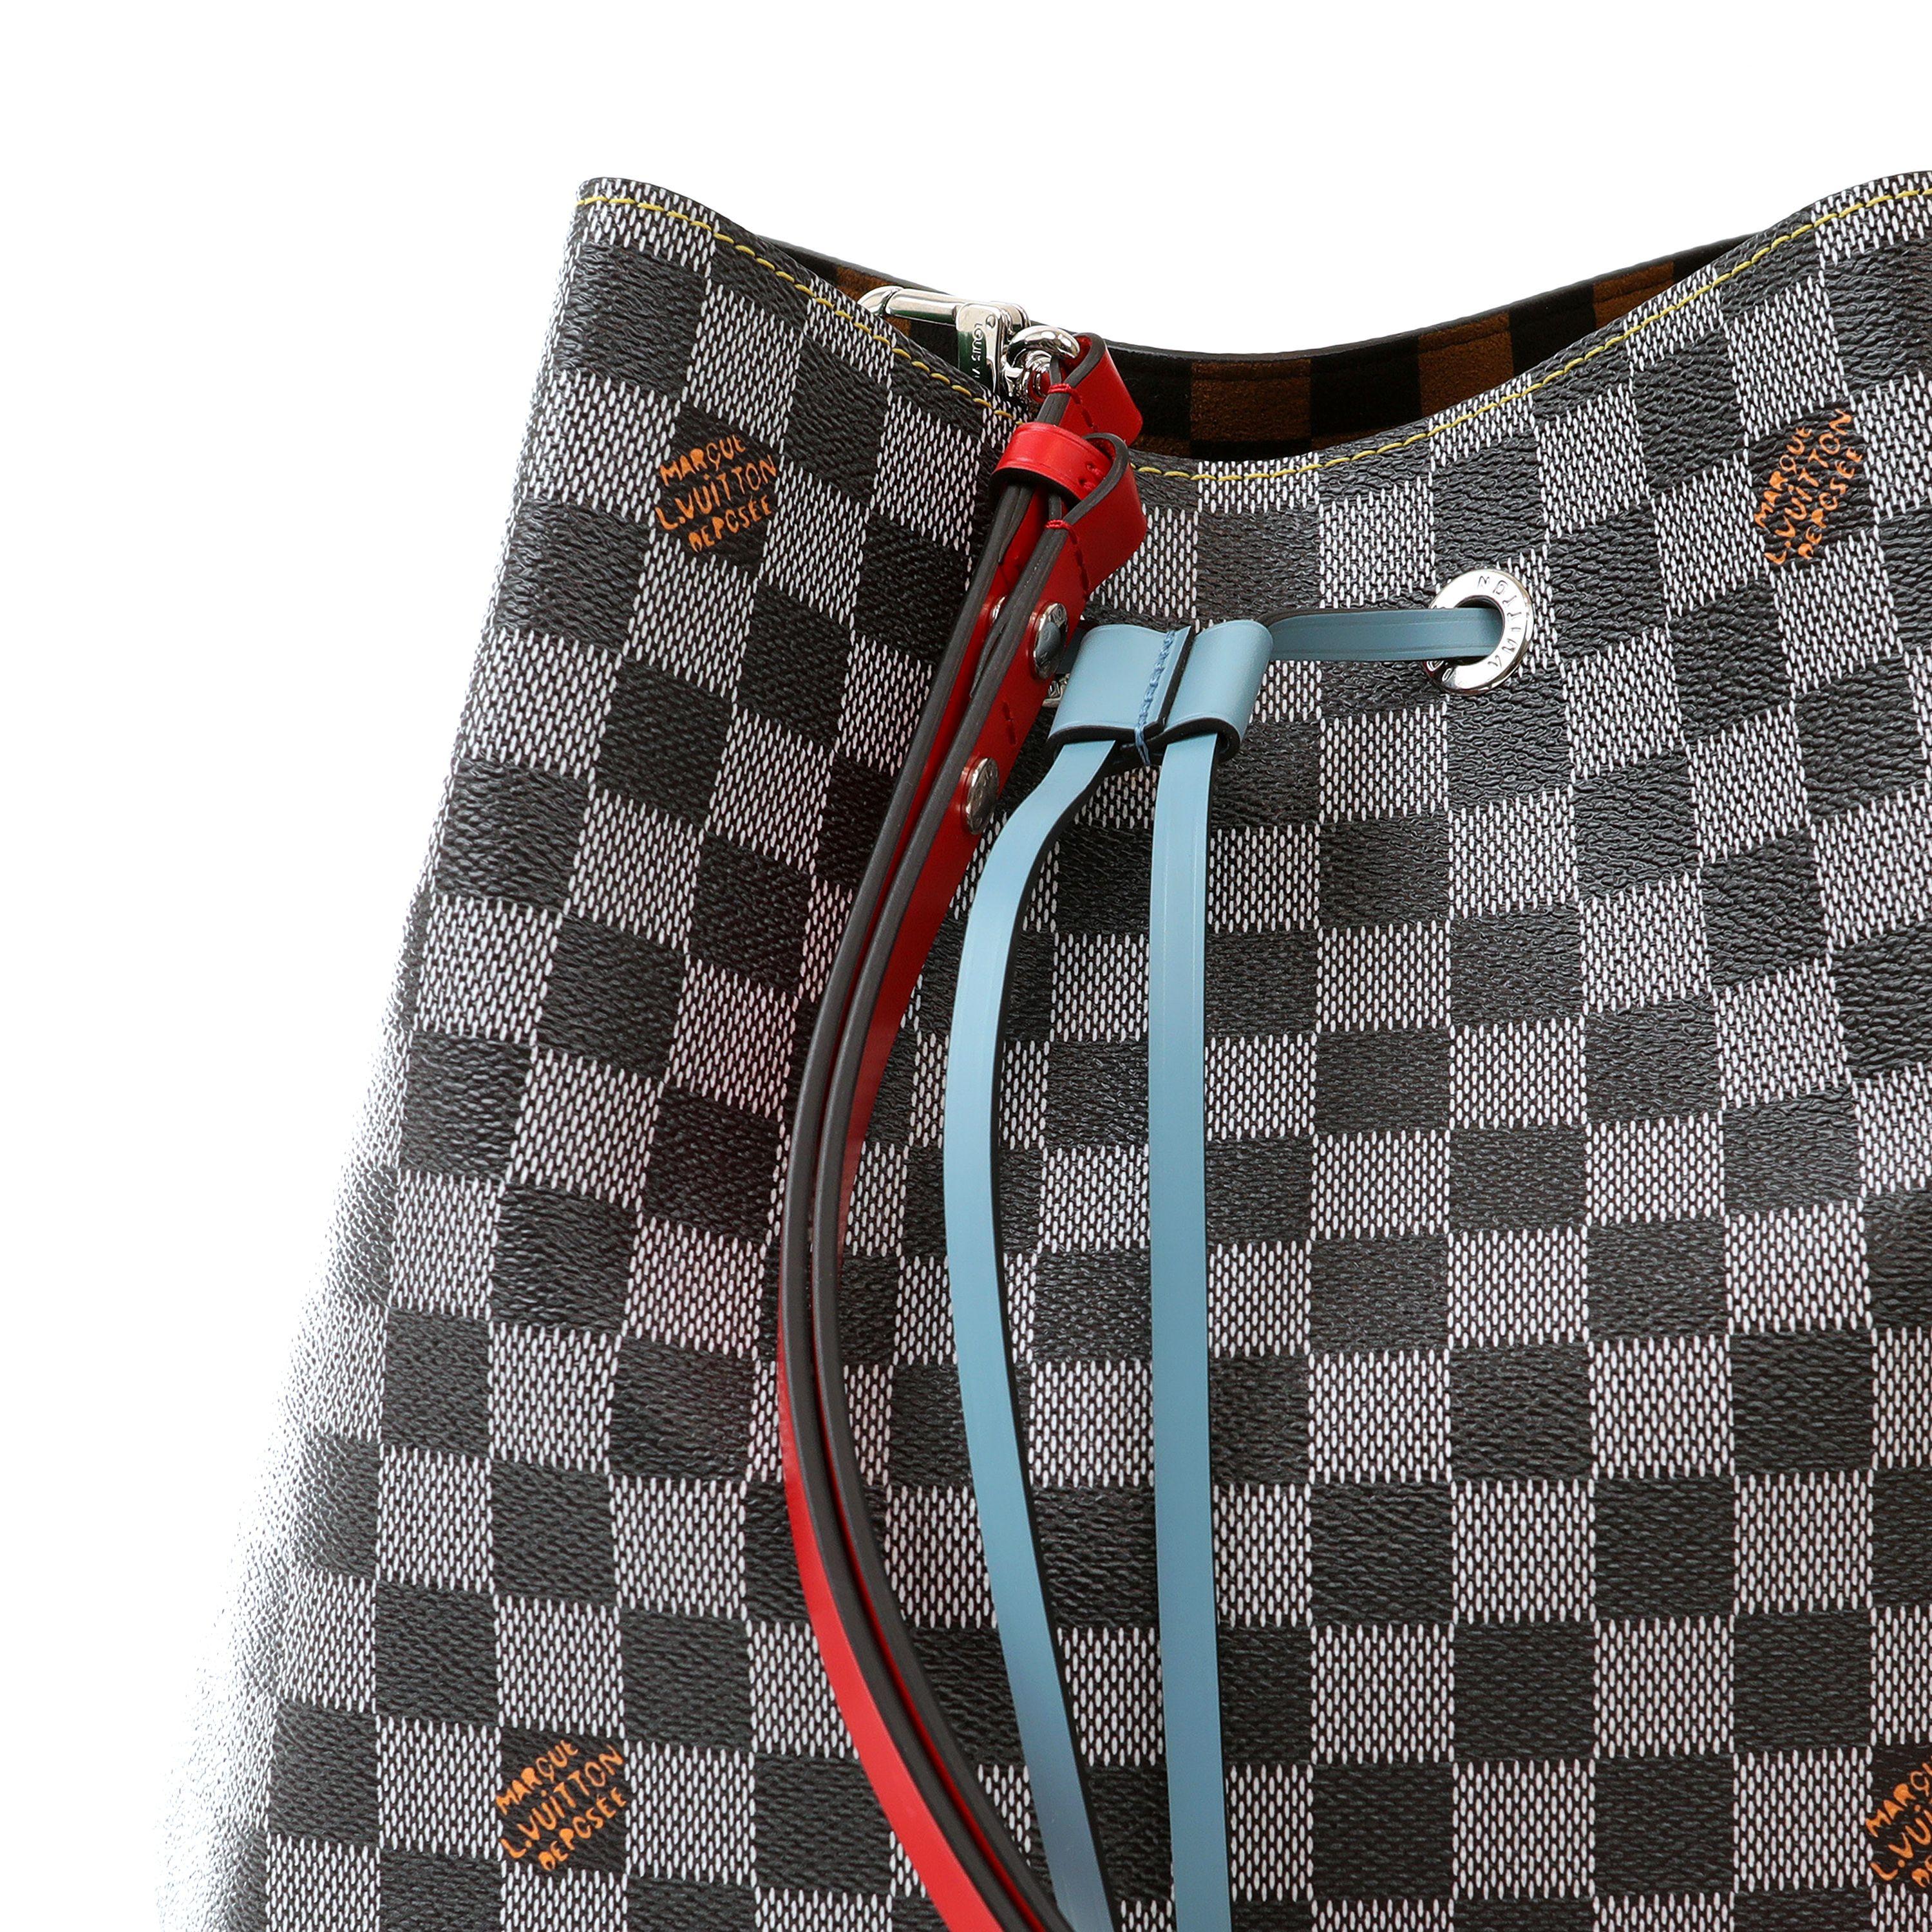 This authentic Louis Vuitton Black Damier MM Neo Noe is a limited edition piece from the 2019 collection.  Very rare in black Damier checkered pattern with light blue and red leather trimmings. Dust bag included.

PBF 13826
